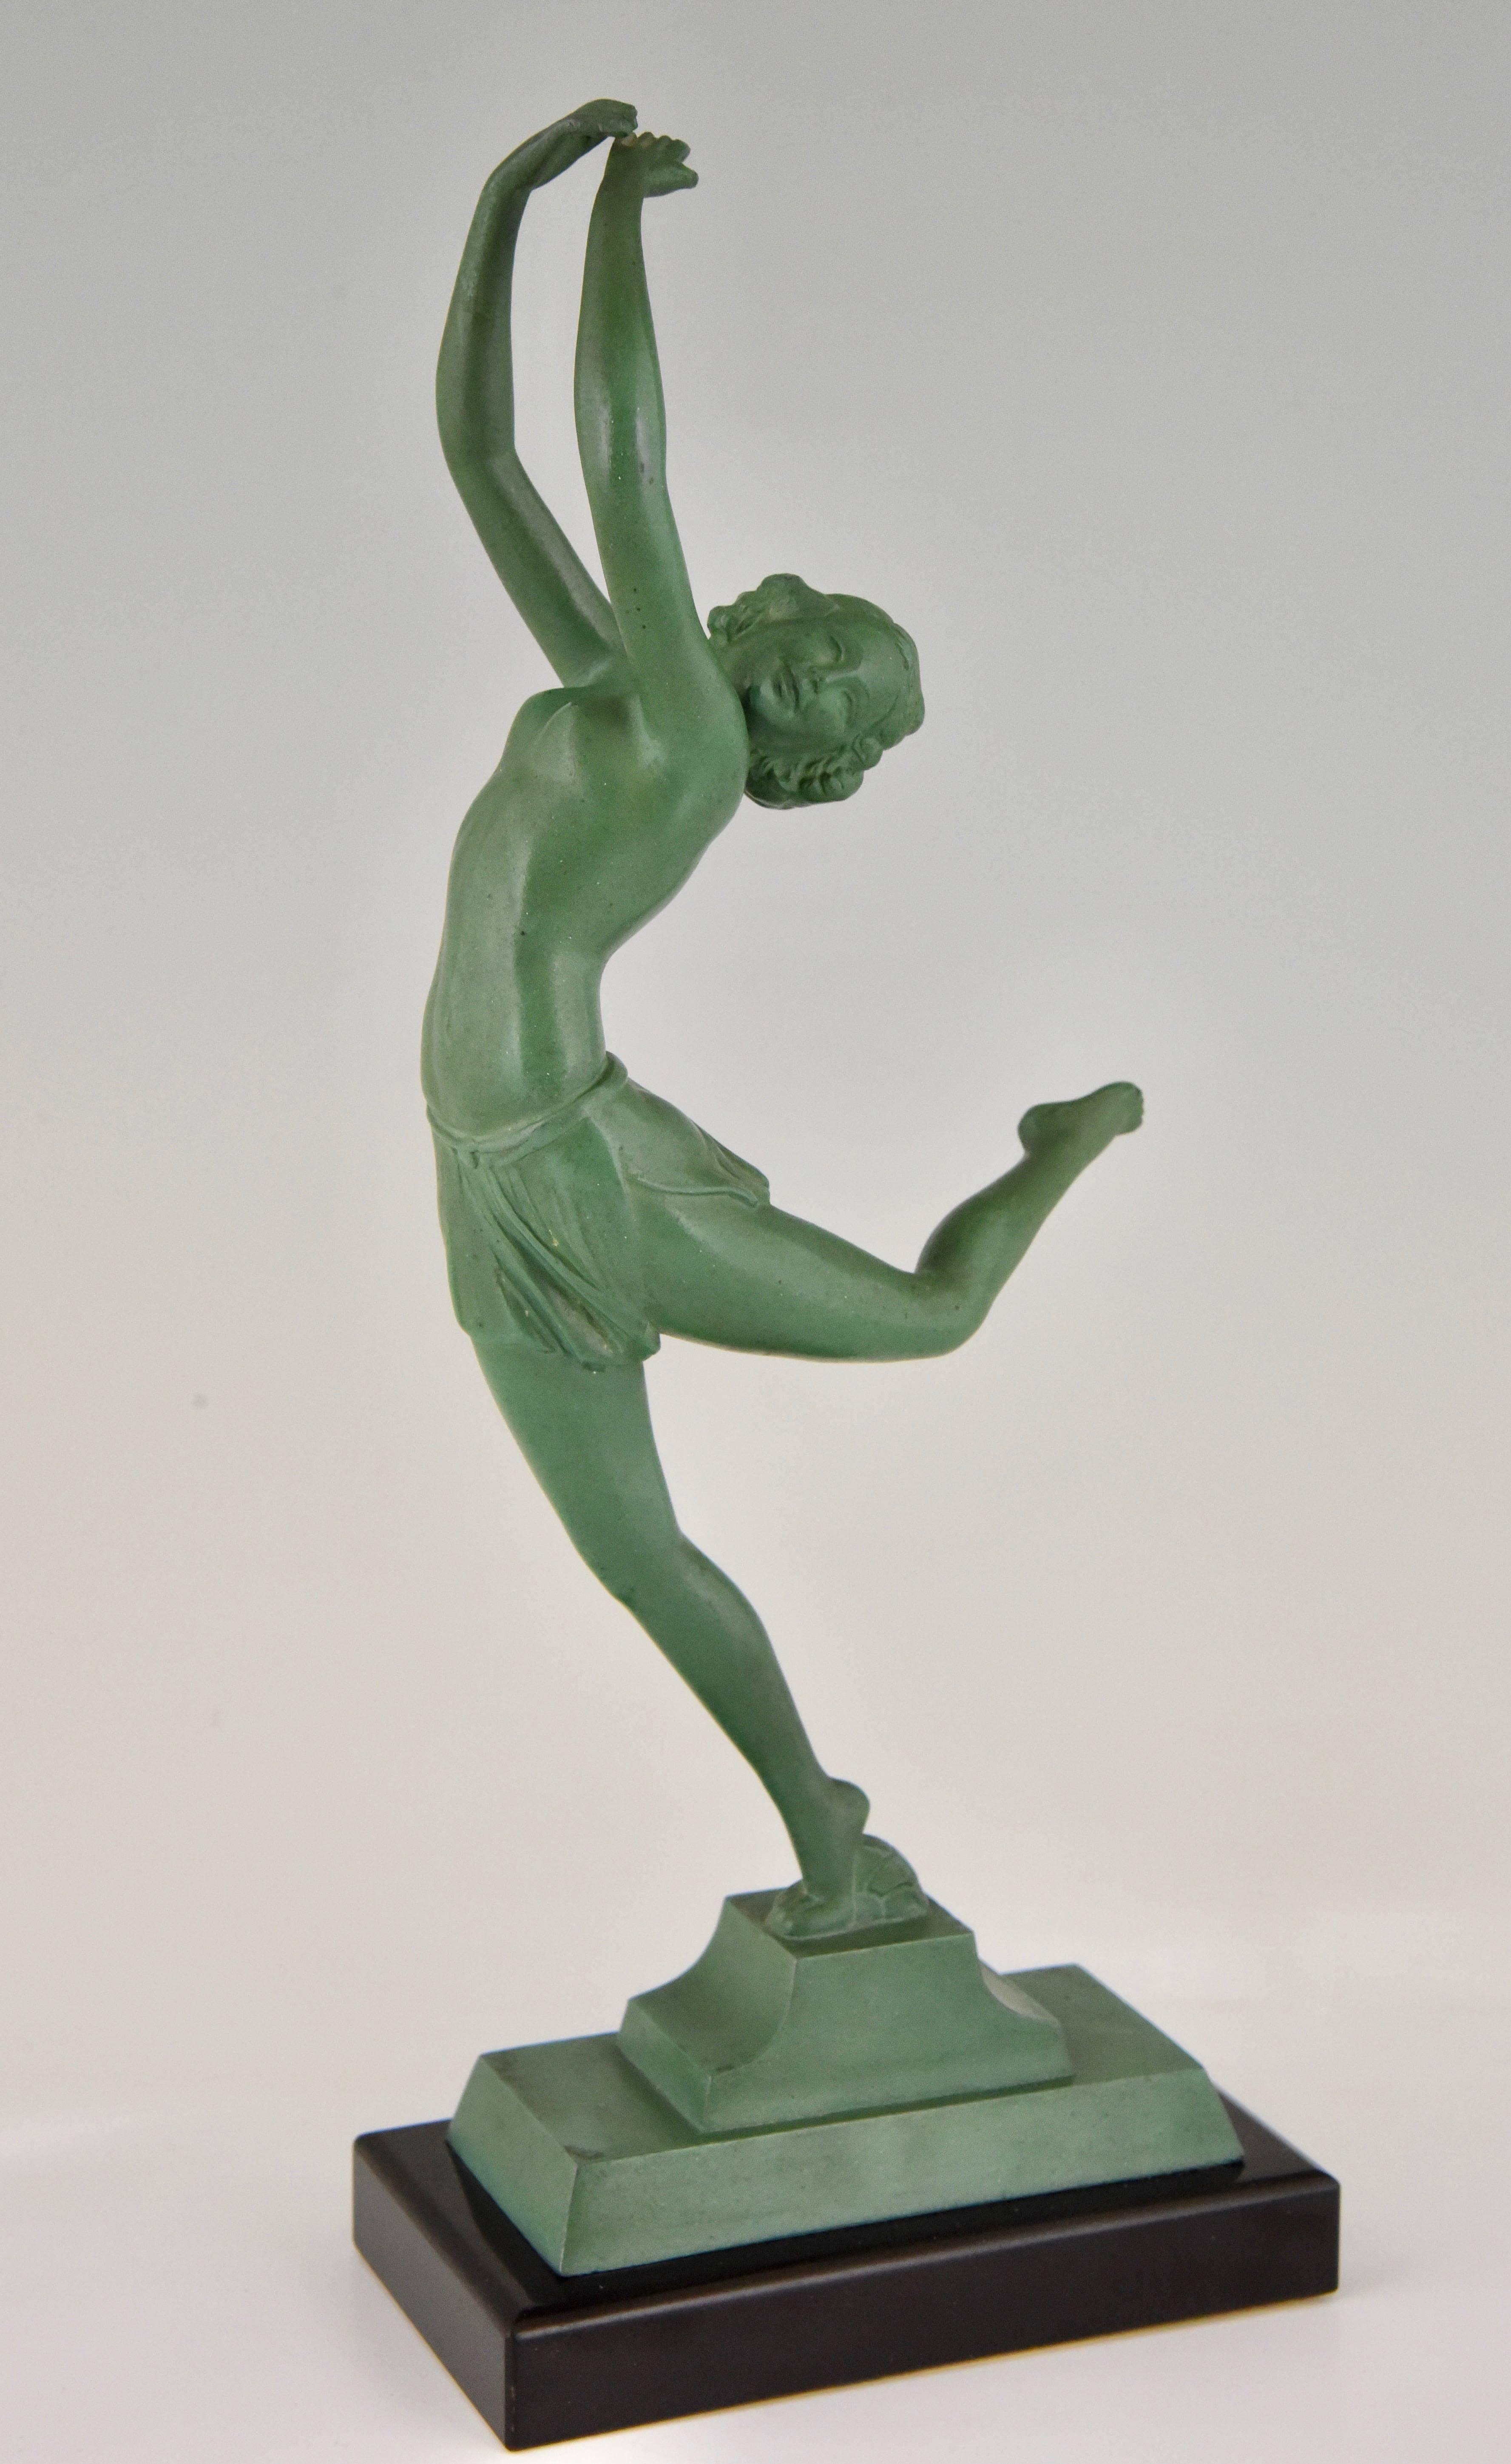 French Art Deco sculpture of a dancer on marble base, 1930

Style: Art Deco
Date: 1930
Material: Patinated art metal. On a black marble base.
Origin: France
Size: H. 32 cm x L. 14 cm. x W. 7 cm. ? 
H. 12.6 inch x L. 5.5 inch x W. 2.8